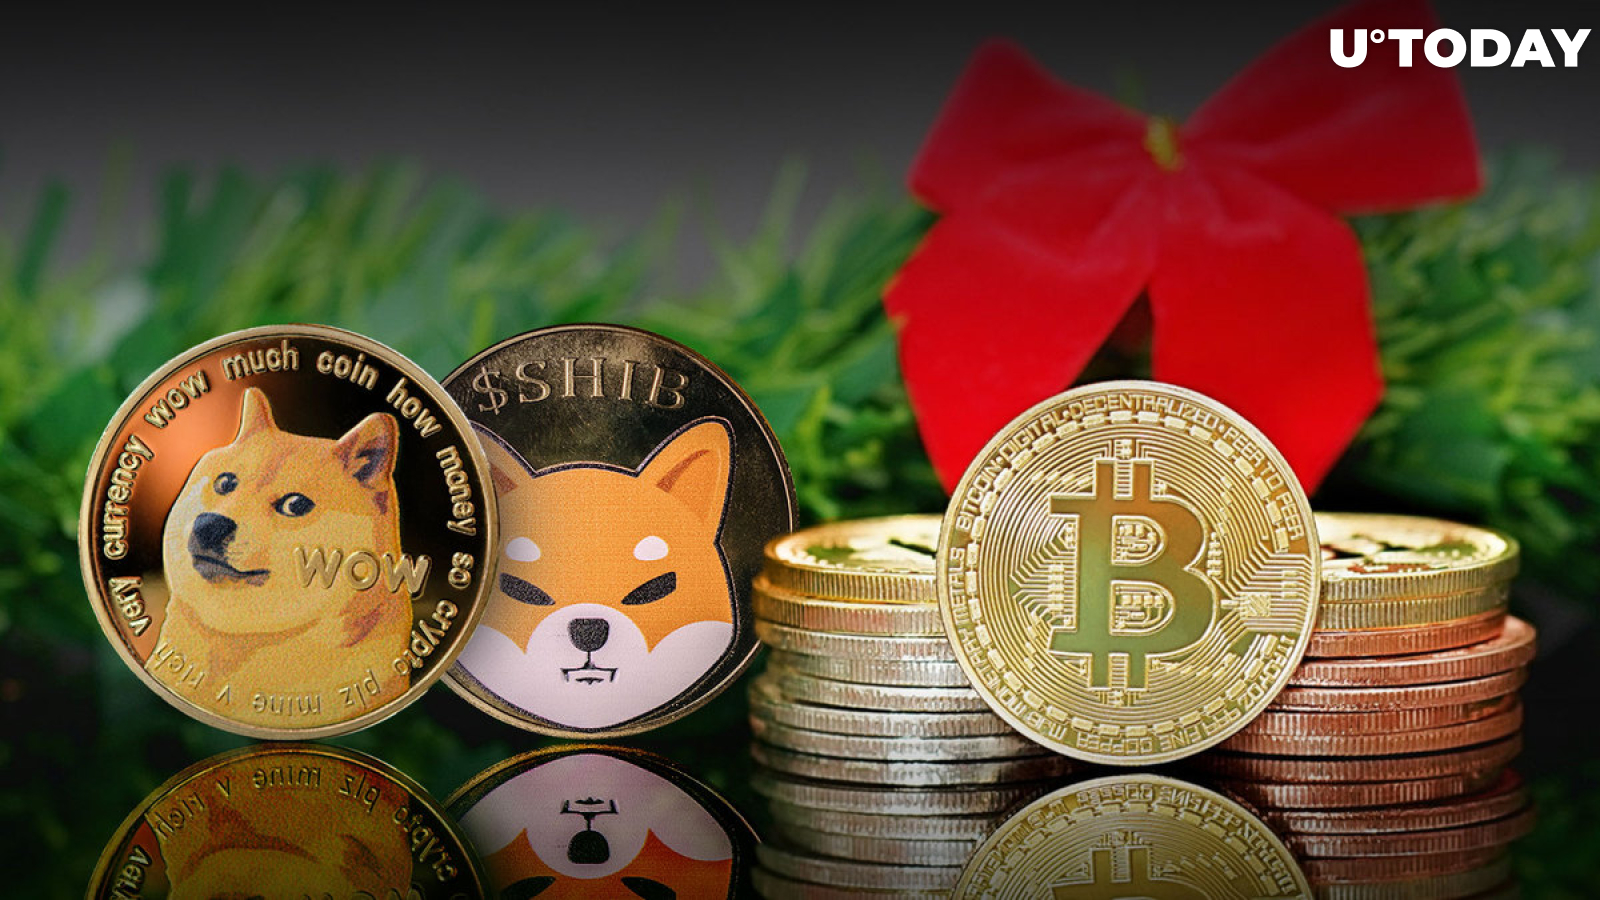 DOGE, SHIB Holders to Receive Big Christmas Bitcoin Giveaway From Top Exchange